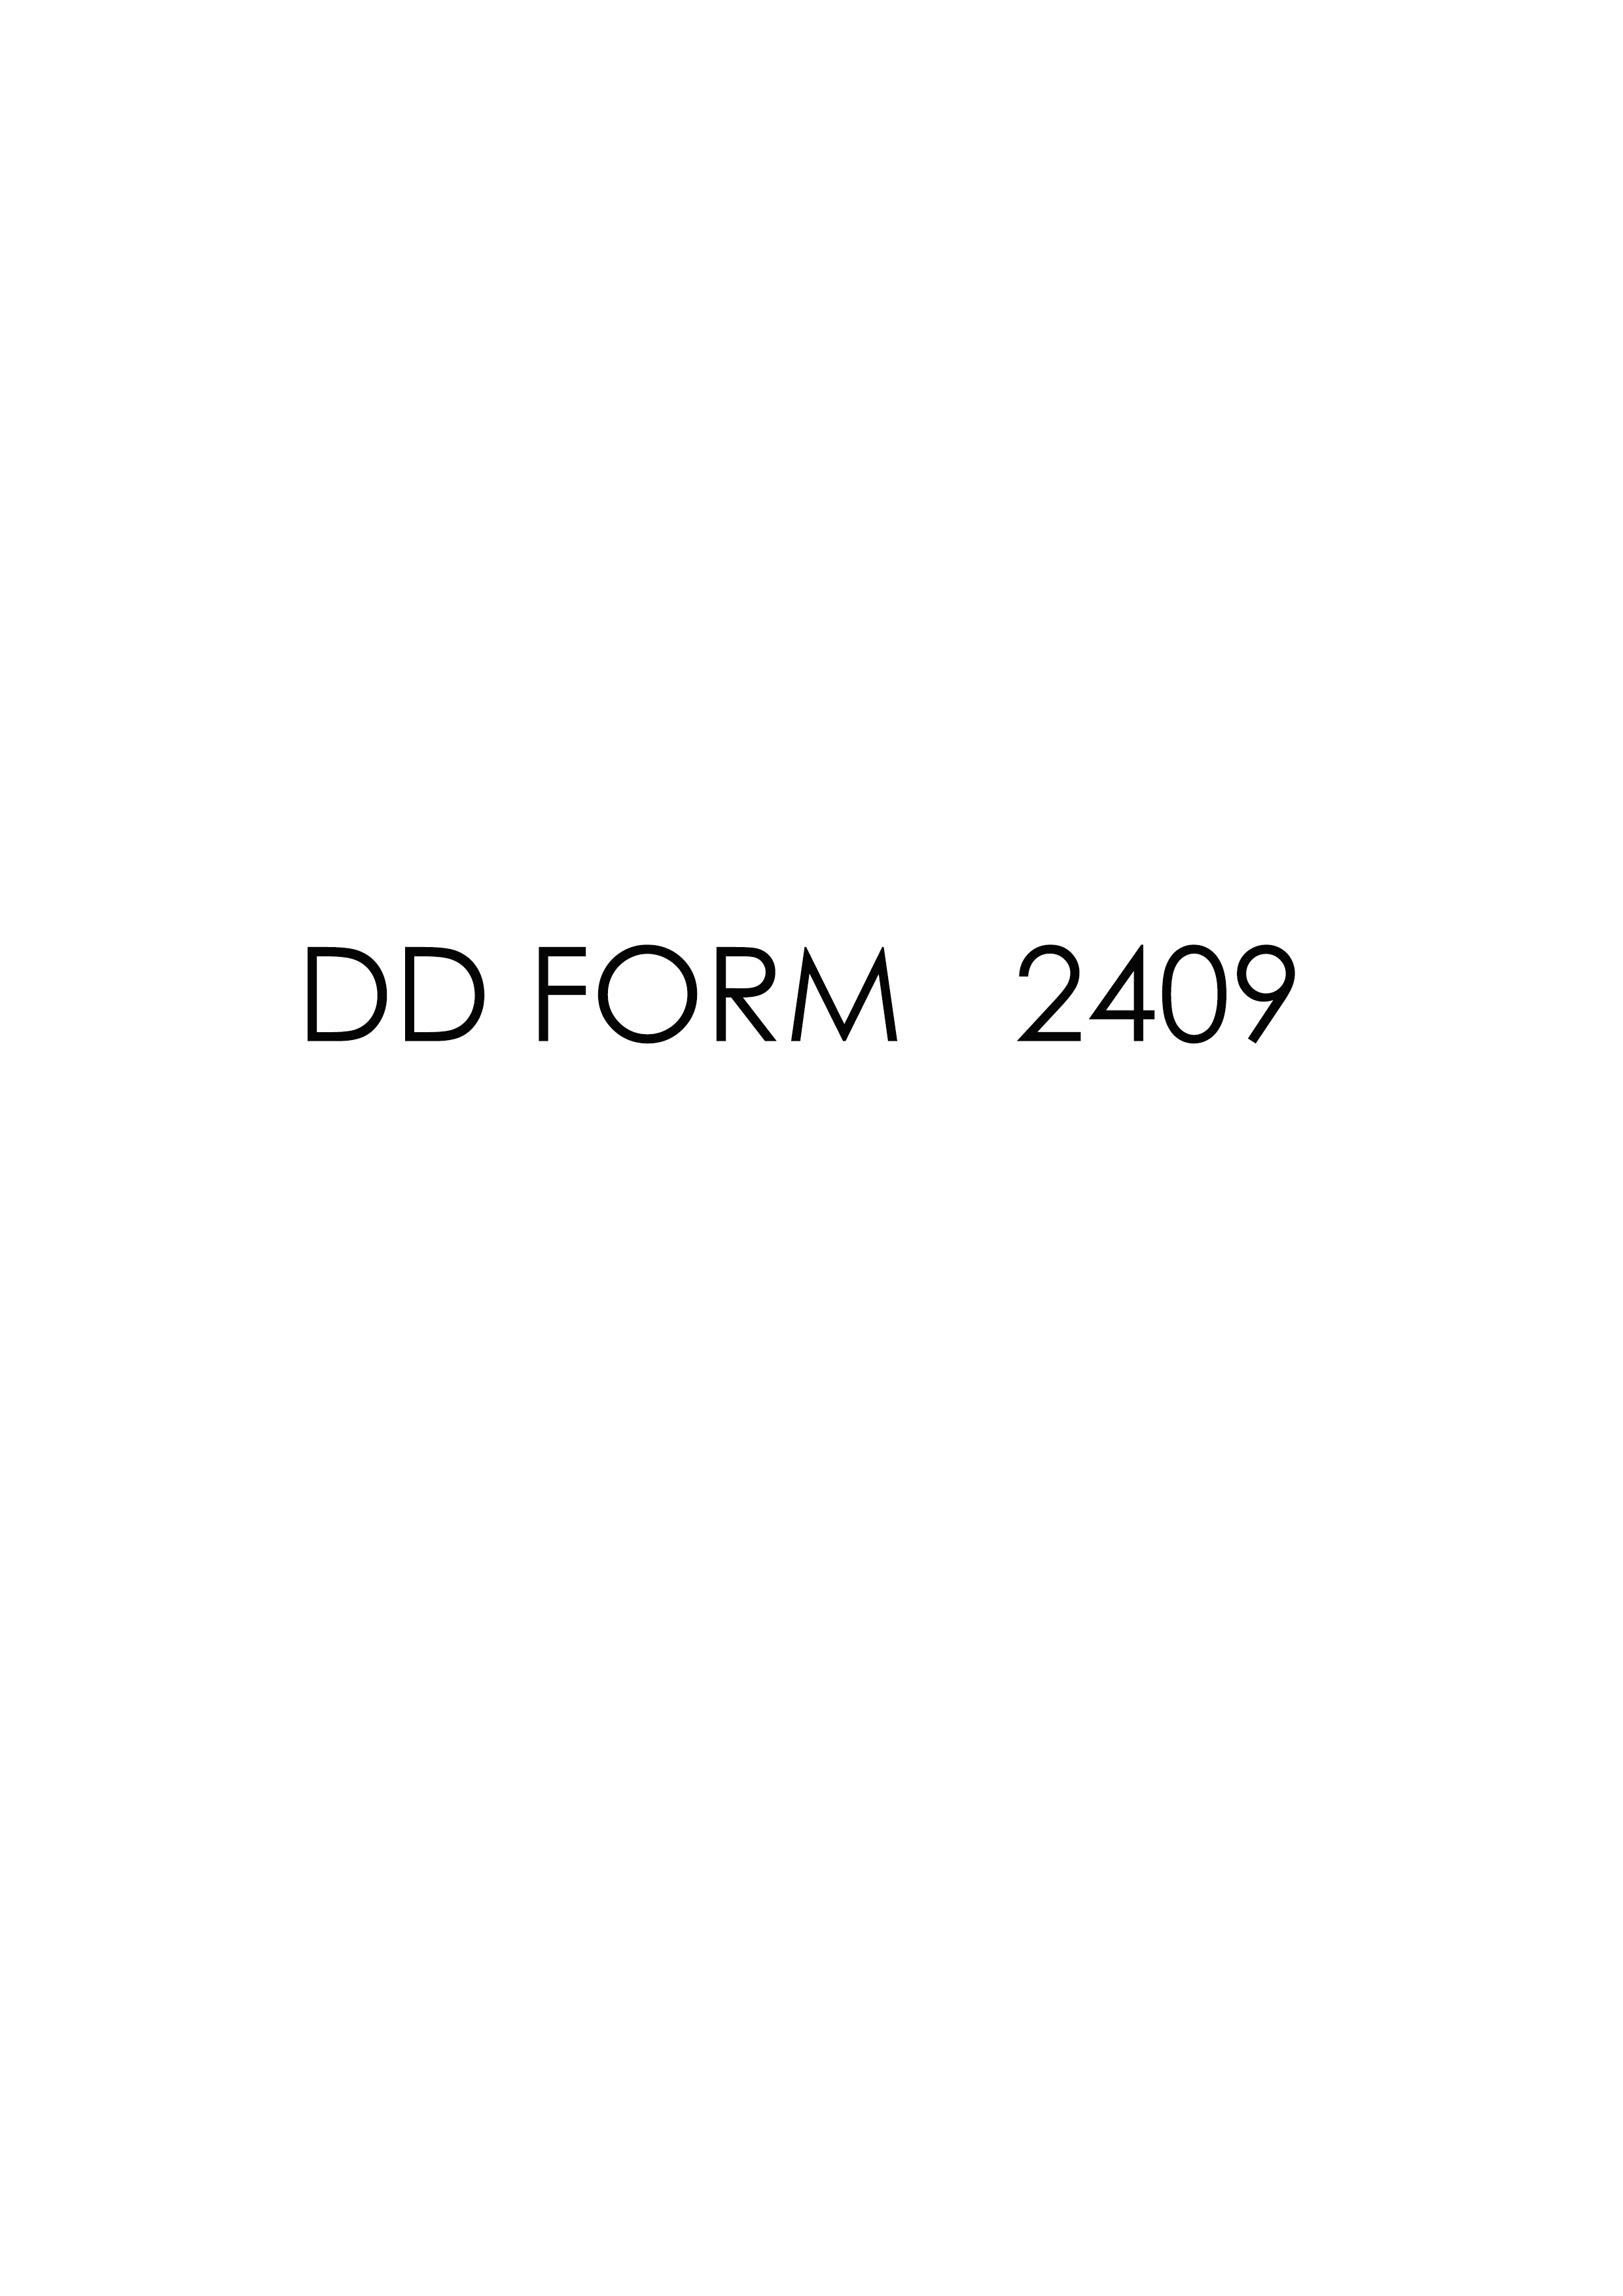 Download Fillable dd Form 2409